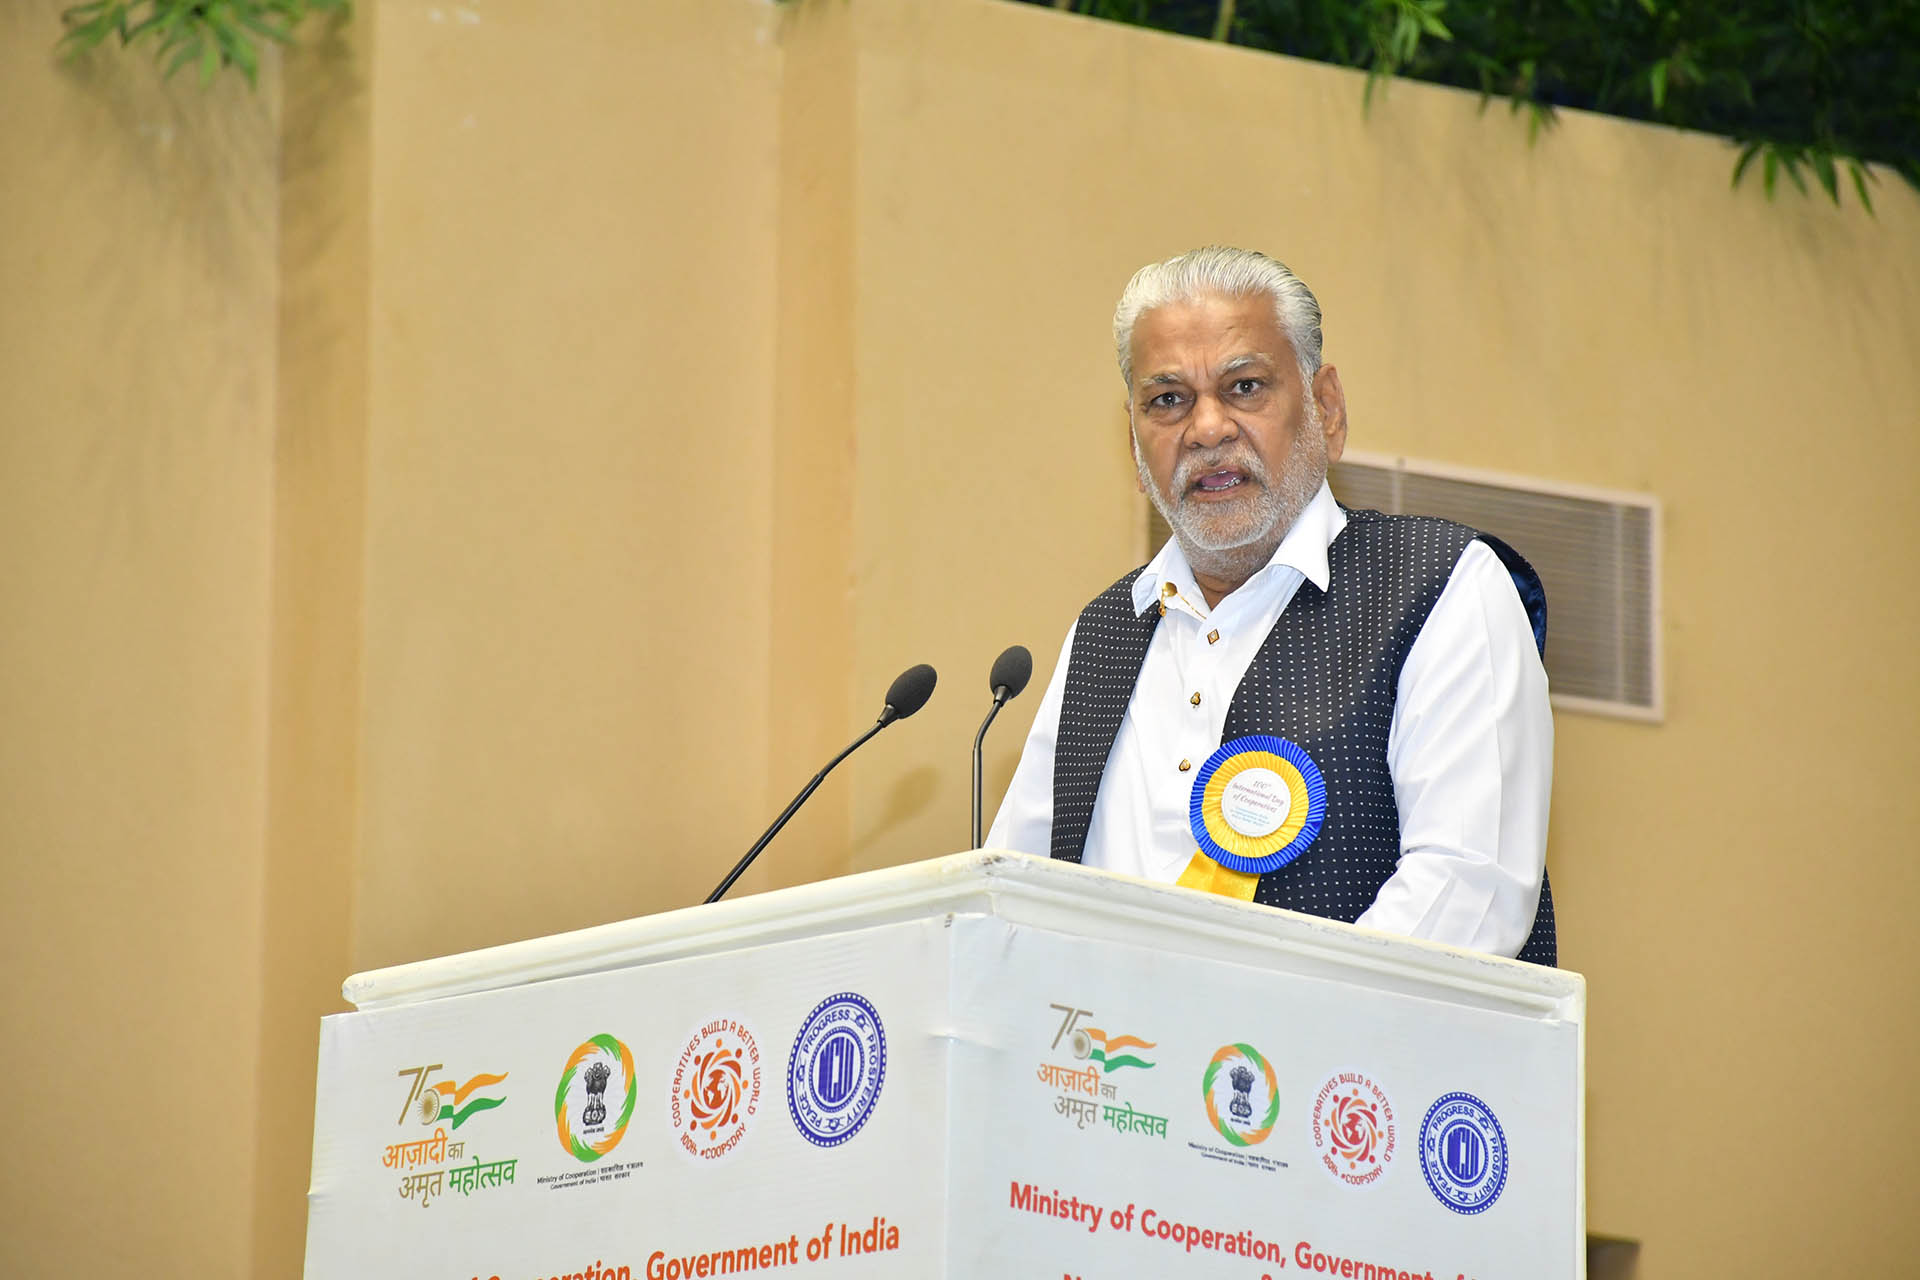 Address by Shri Parhottam Rupala, Hon'ble Union Minister of Fisheries, Animal Husbandry & Dairy on the 100th   International Day of Cooperatives